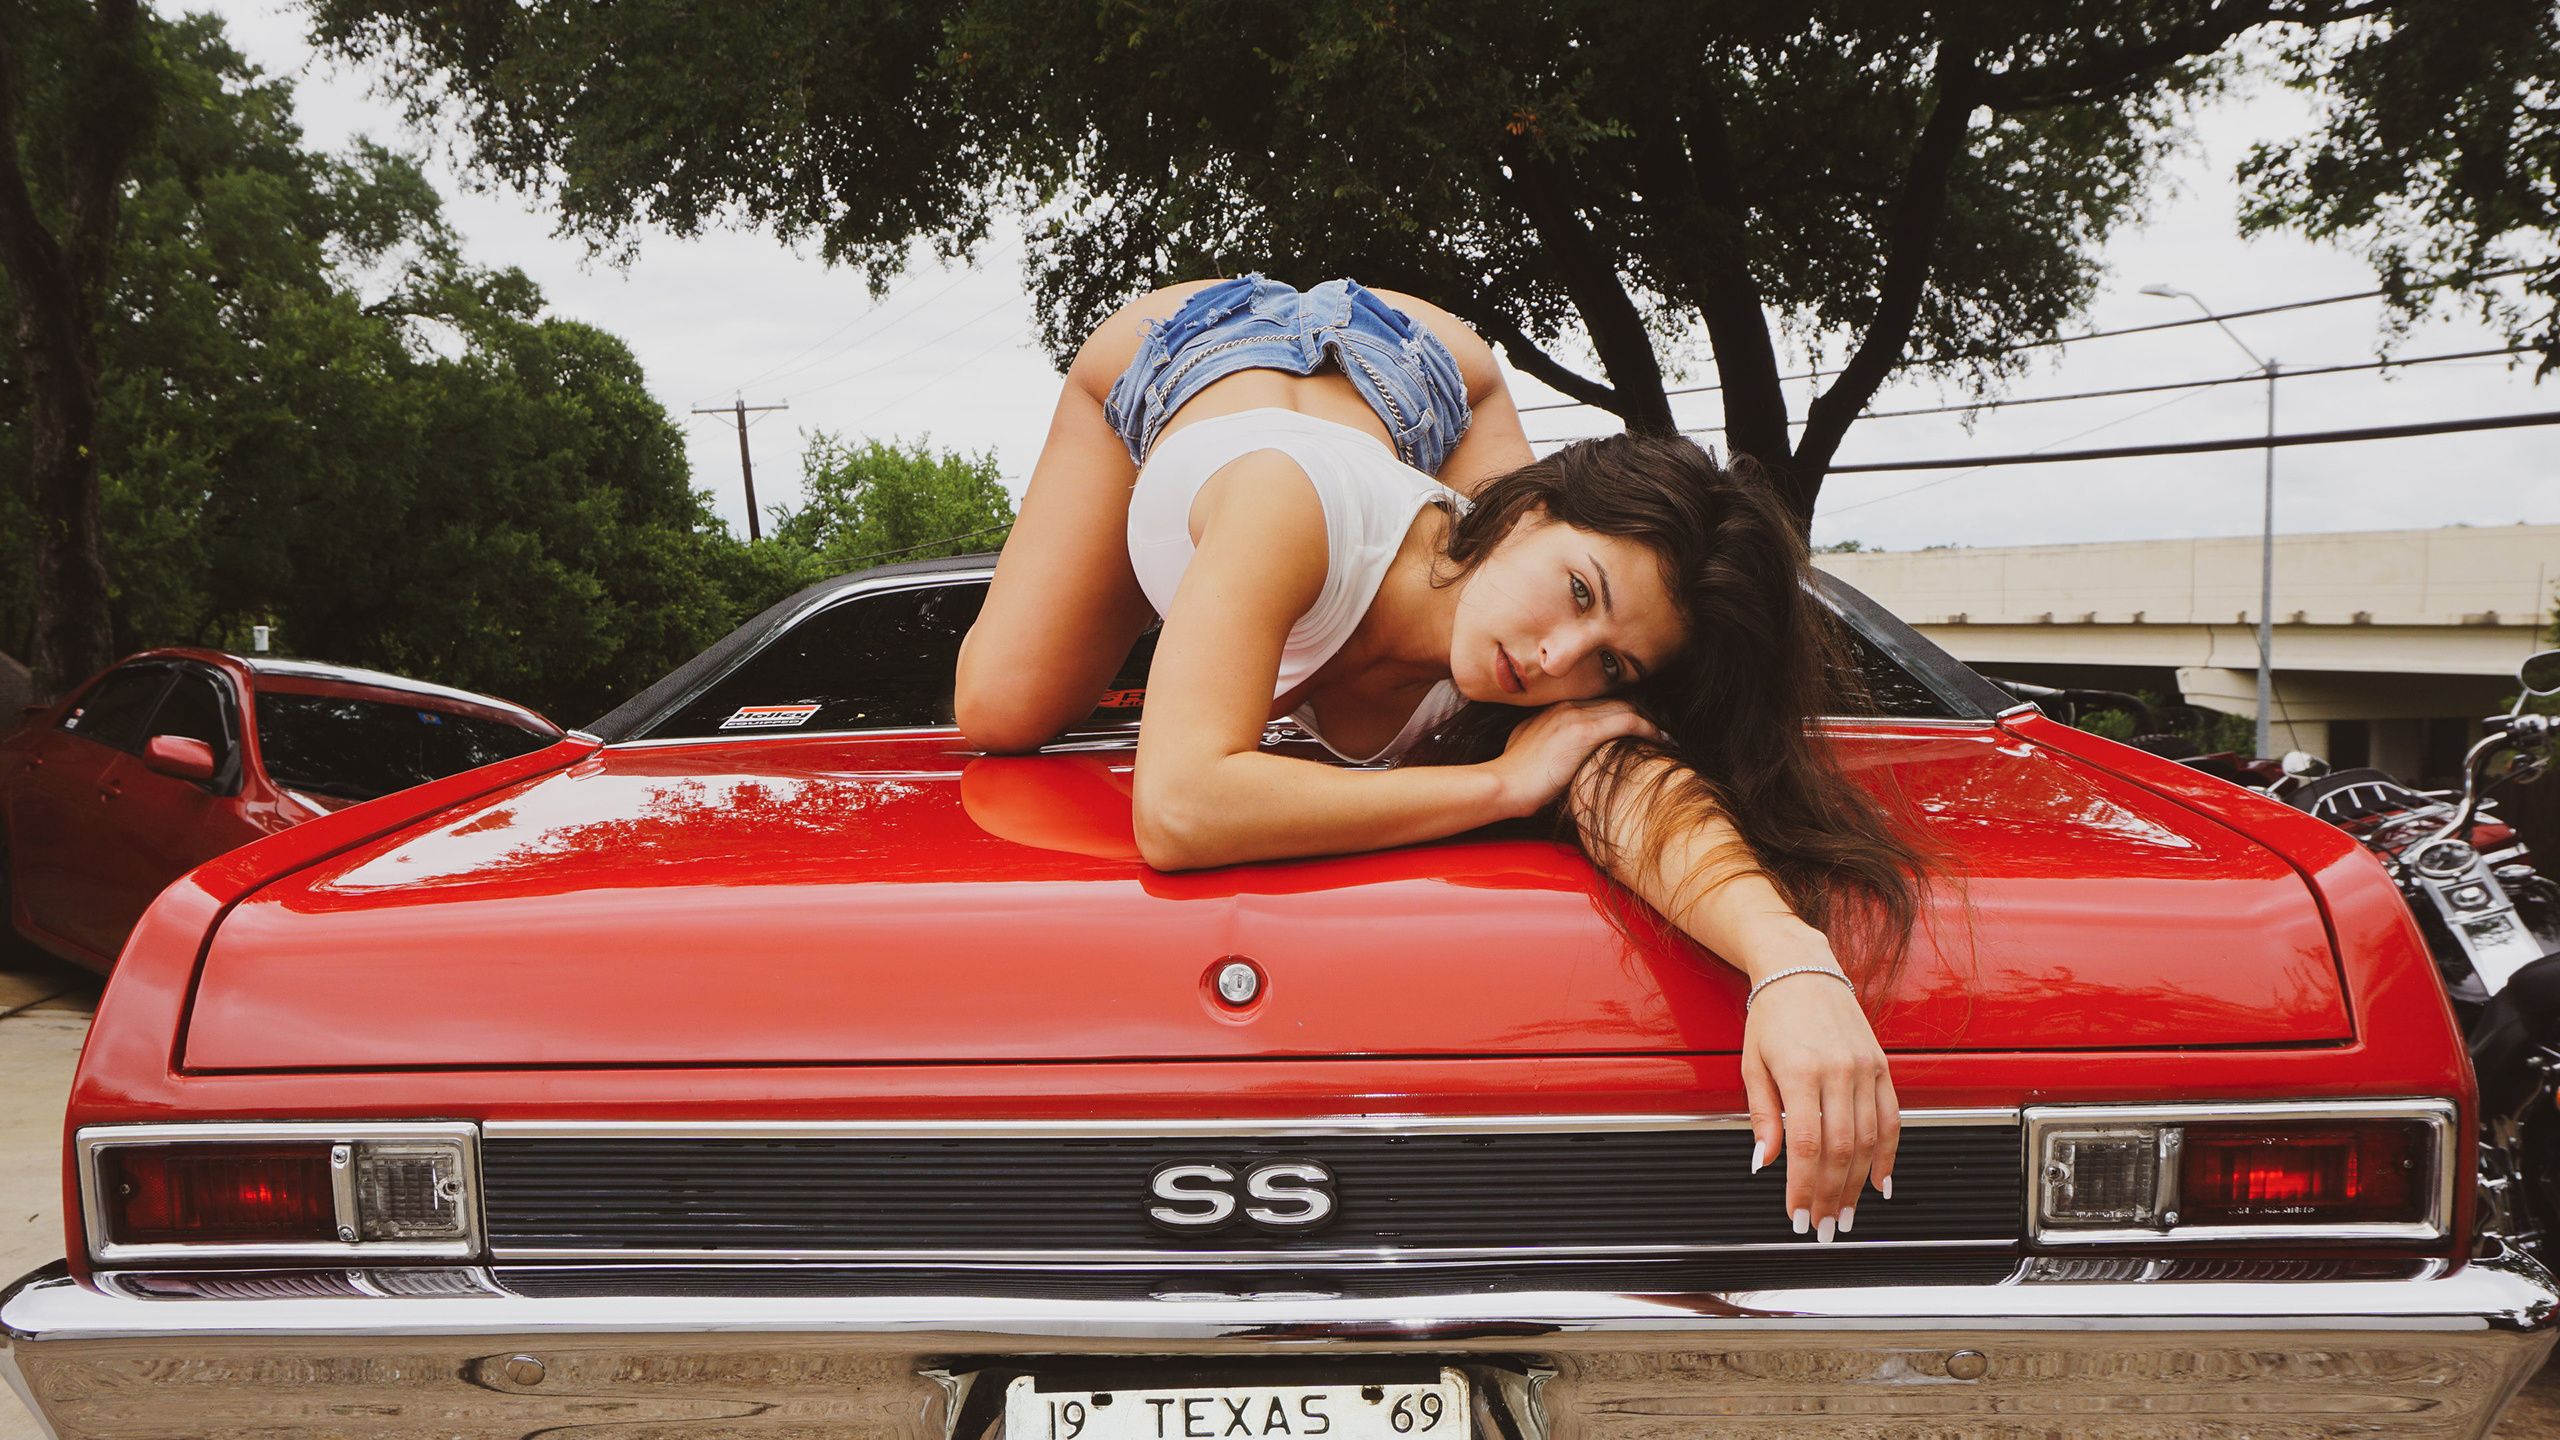 leah gotti, chevrolet ss 427, american cars, women outdoors, women, mode, brunette, ass, hips, jean shorts, white tops, tank top, short tops, women with cars, red cars, bent over, texas, motorcycle